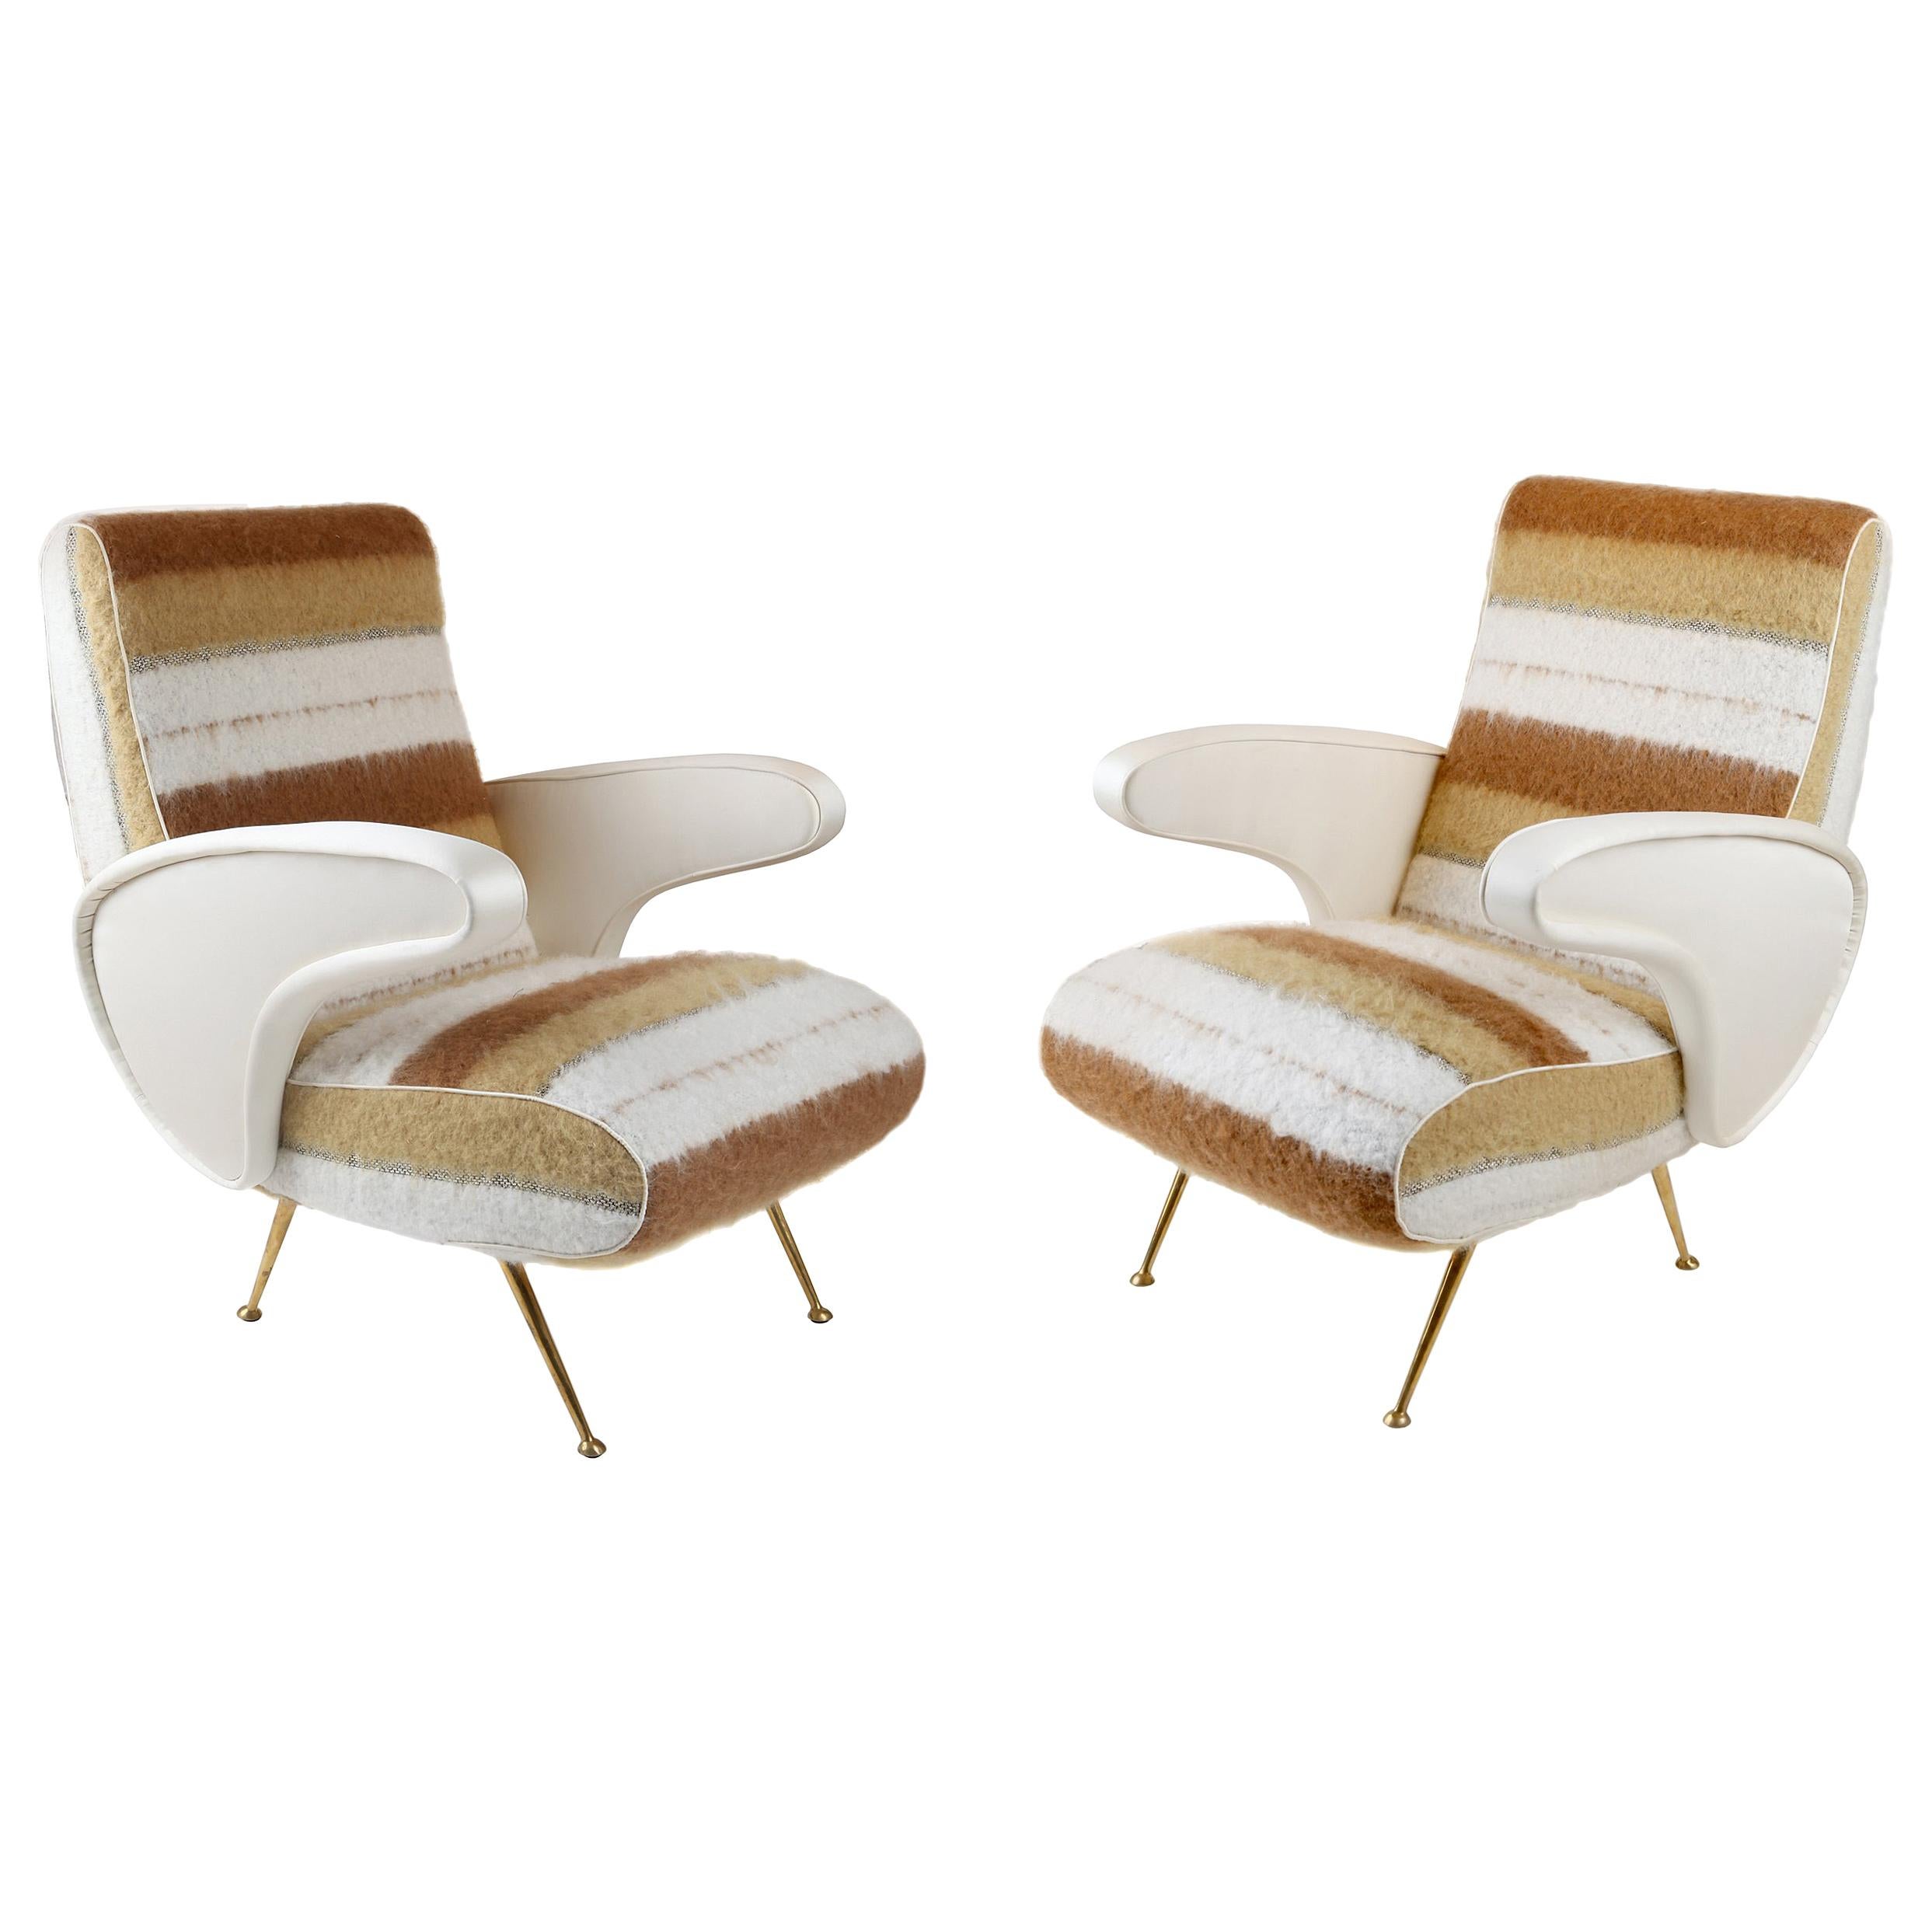 Pair of Mid-Century Modern Italian Chairs Upholstered in Textured Wool Fabric